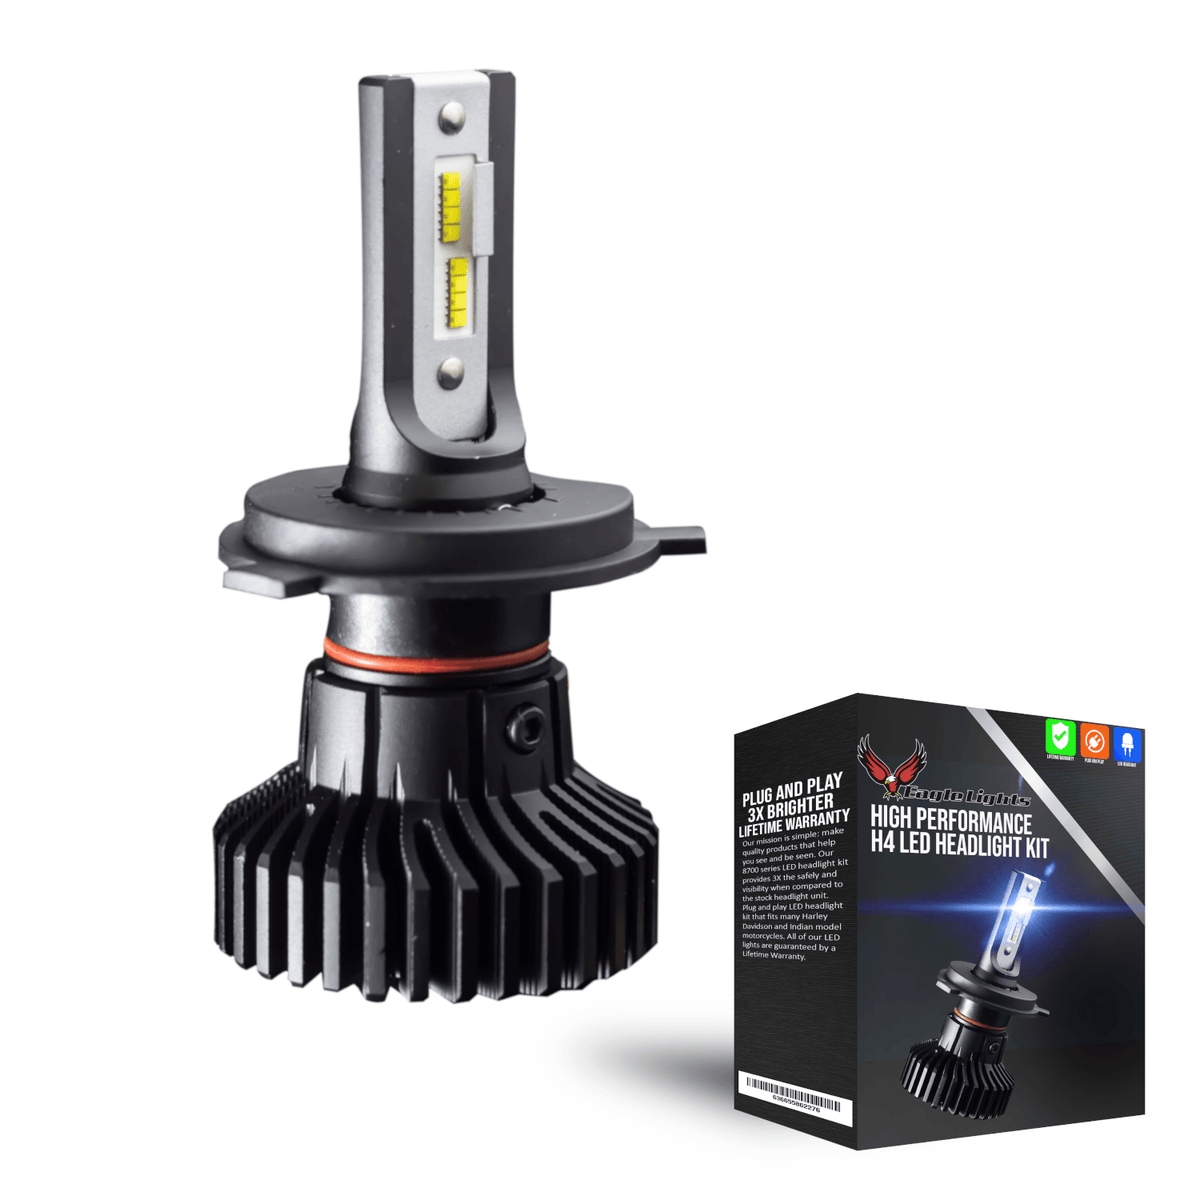 Eagle Lights Infinity Beam H4 / 9003 LED Headlight Bulb for Triumph Motorcycles